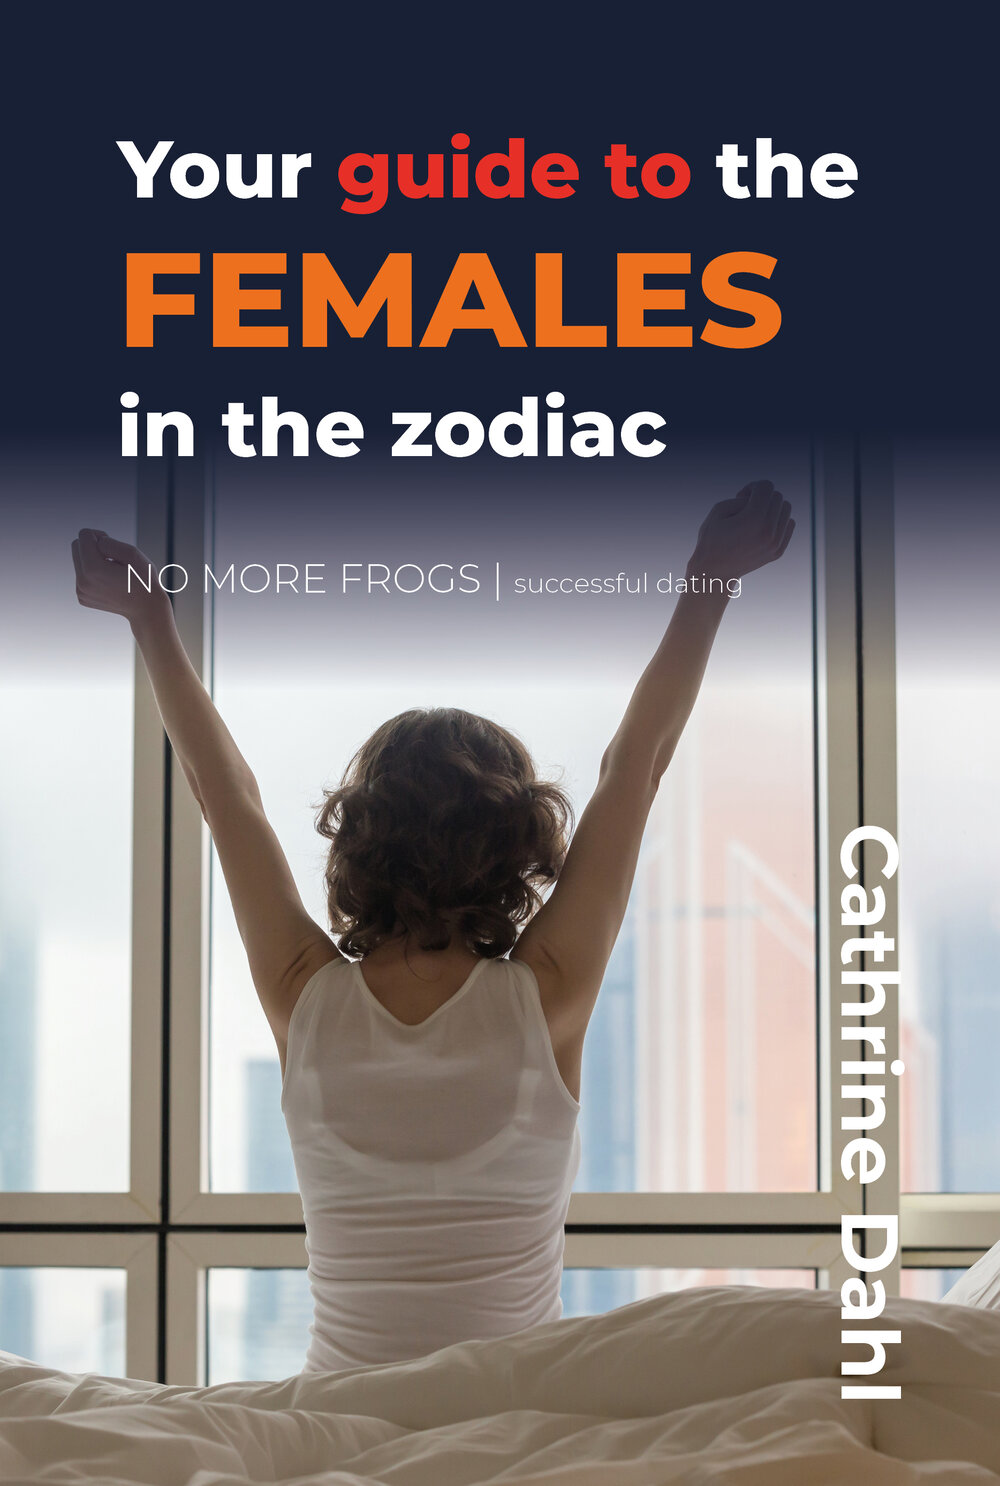 Get to know the women in the zodiac. Read about all the star signs. (Copy)